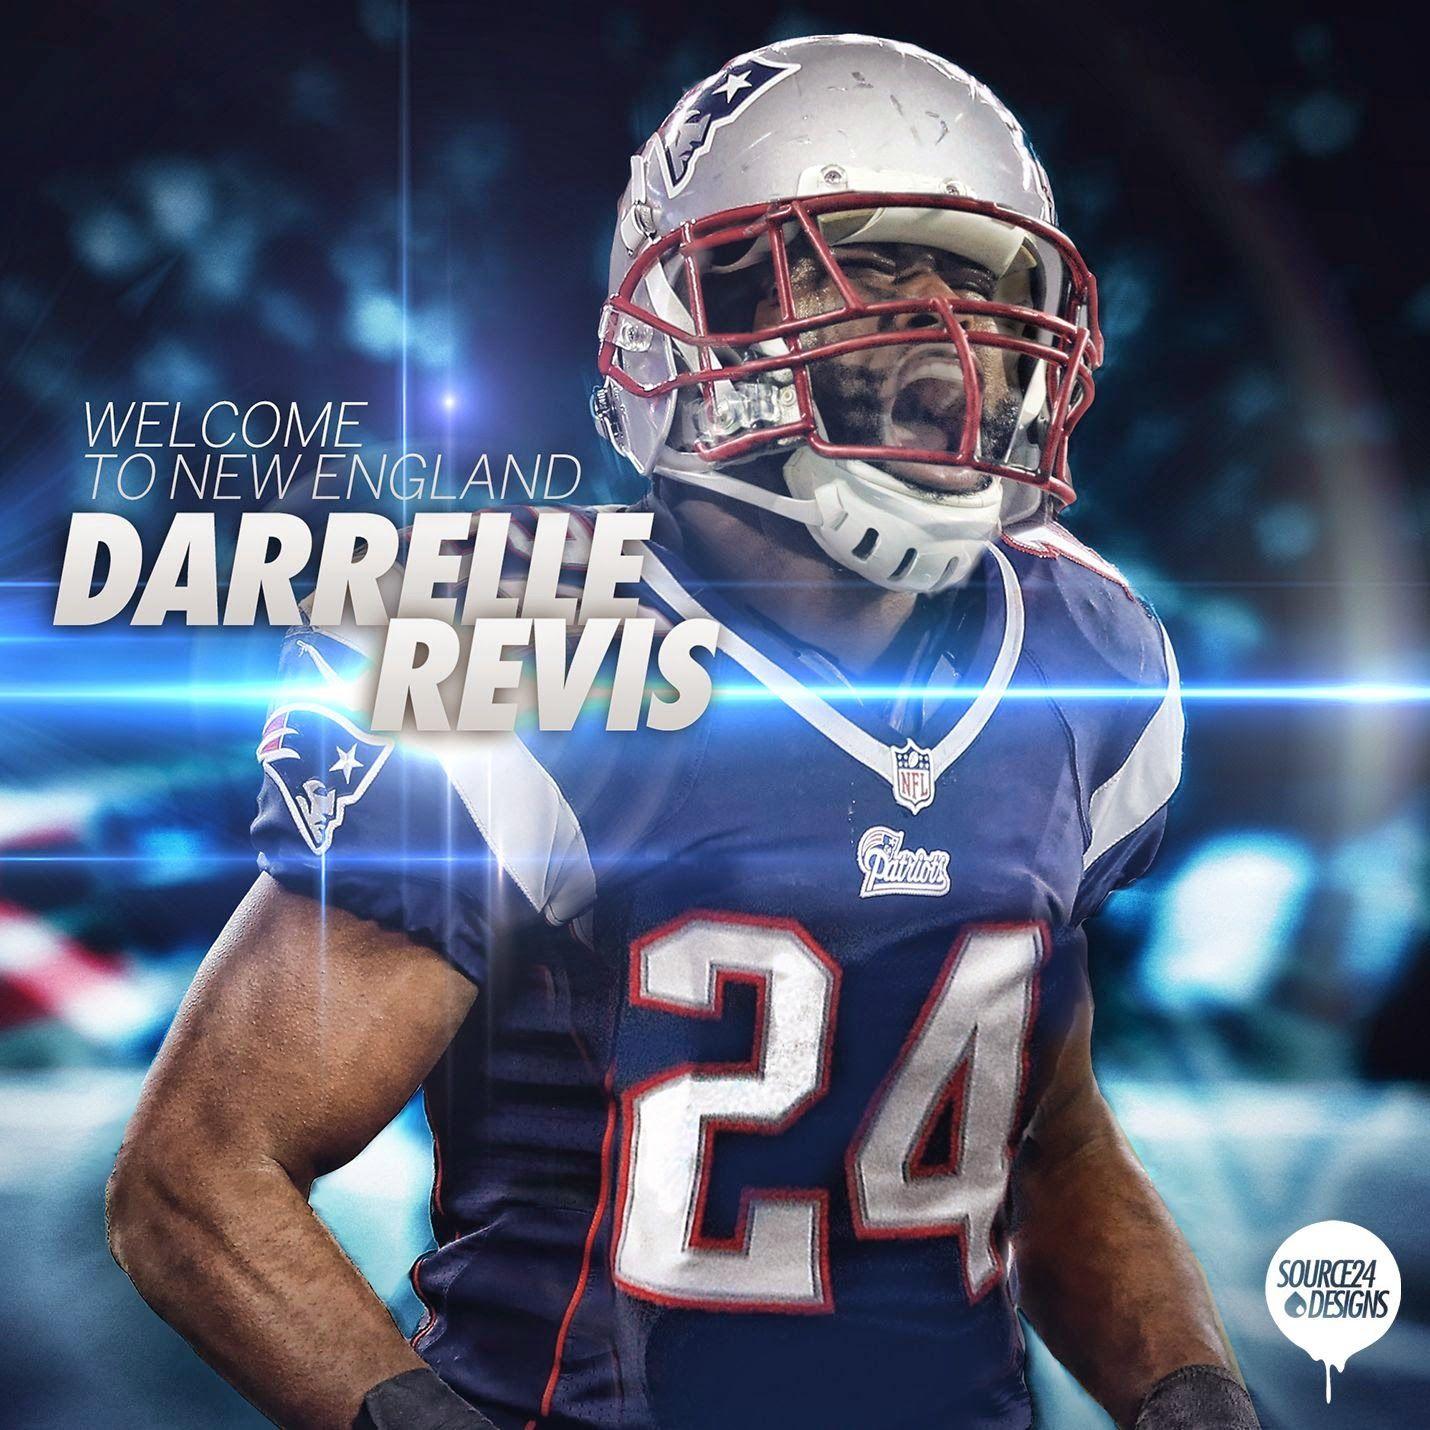 It's finally official: Darrelle Revis is a Patriot